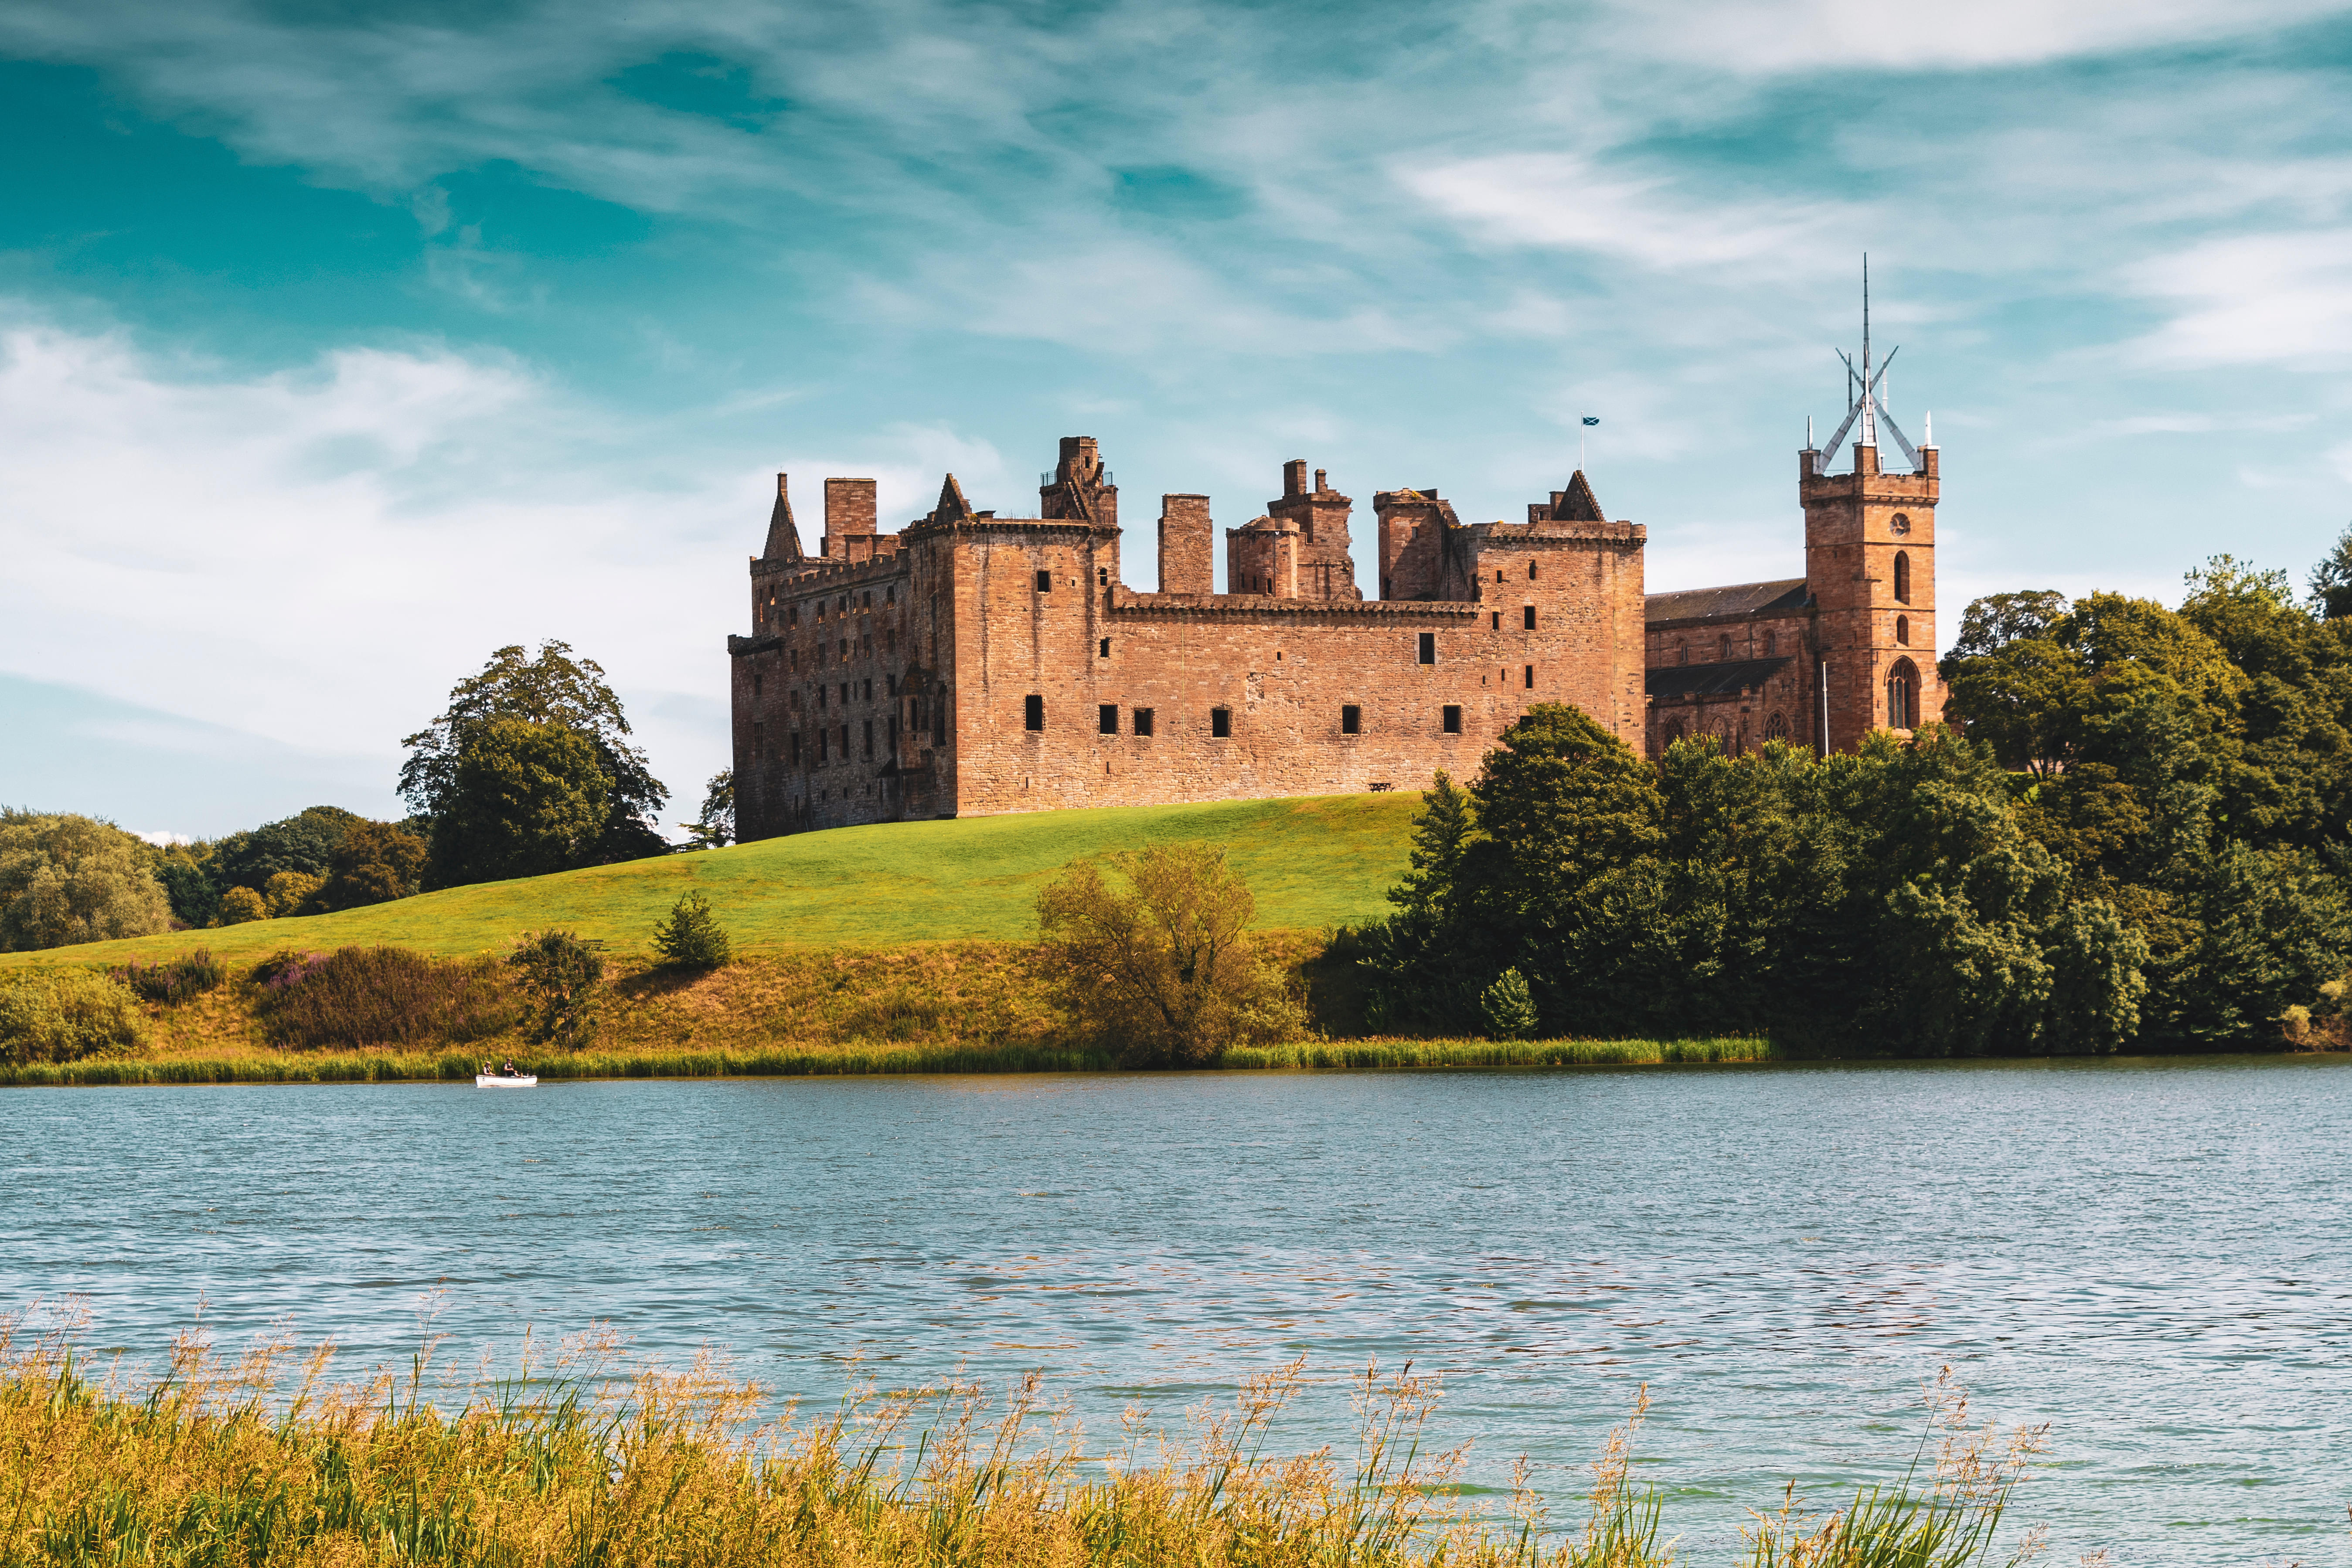 Step into the Linlithgow Palace